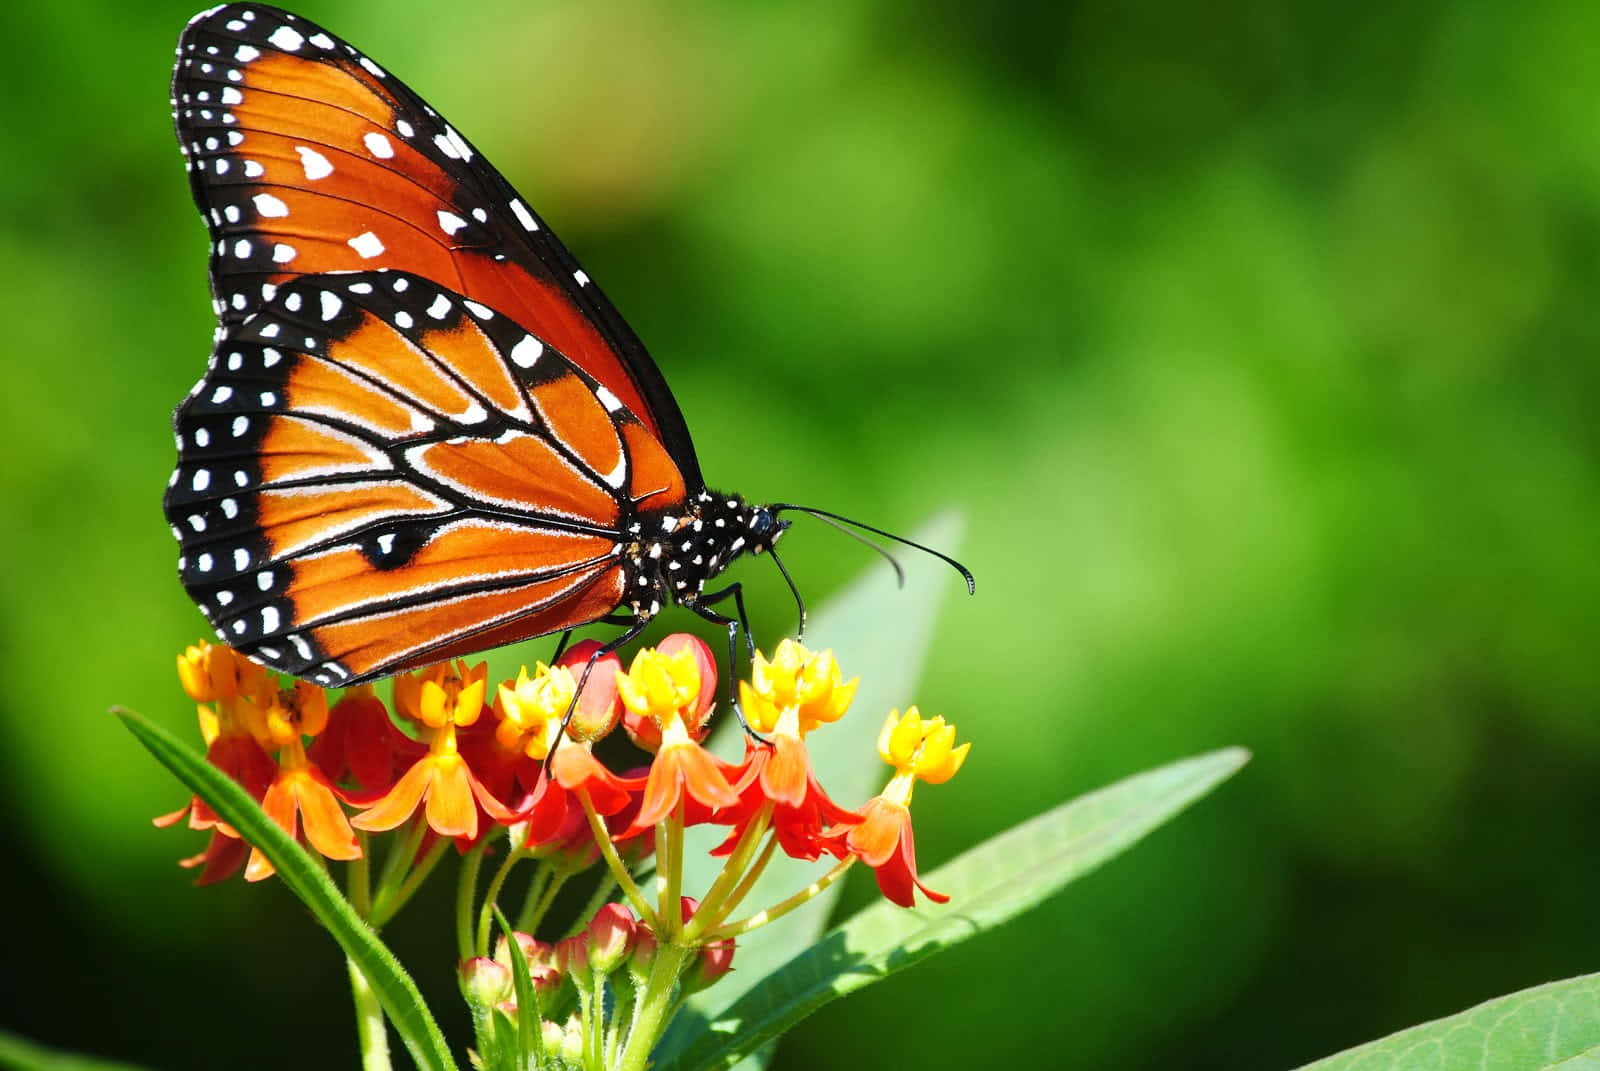 Enjoying Nature One Butterfly at a Time Wallpaper